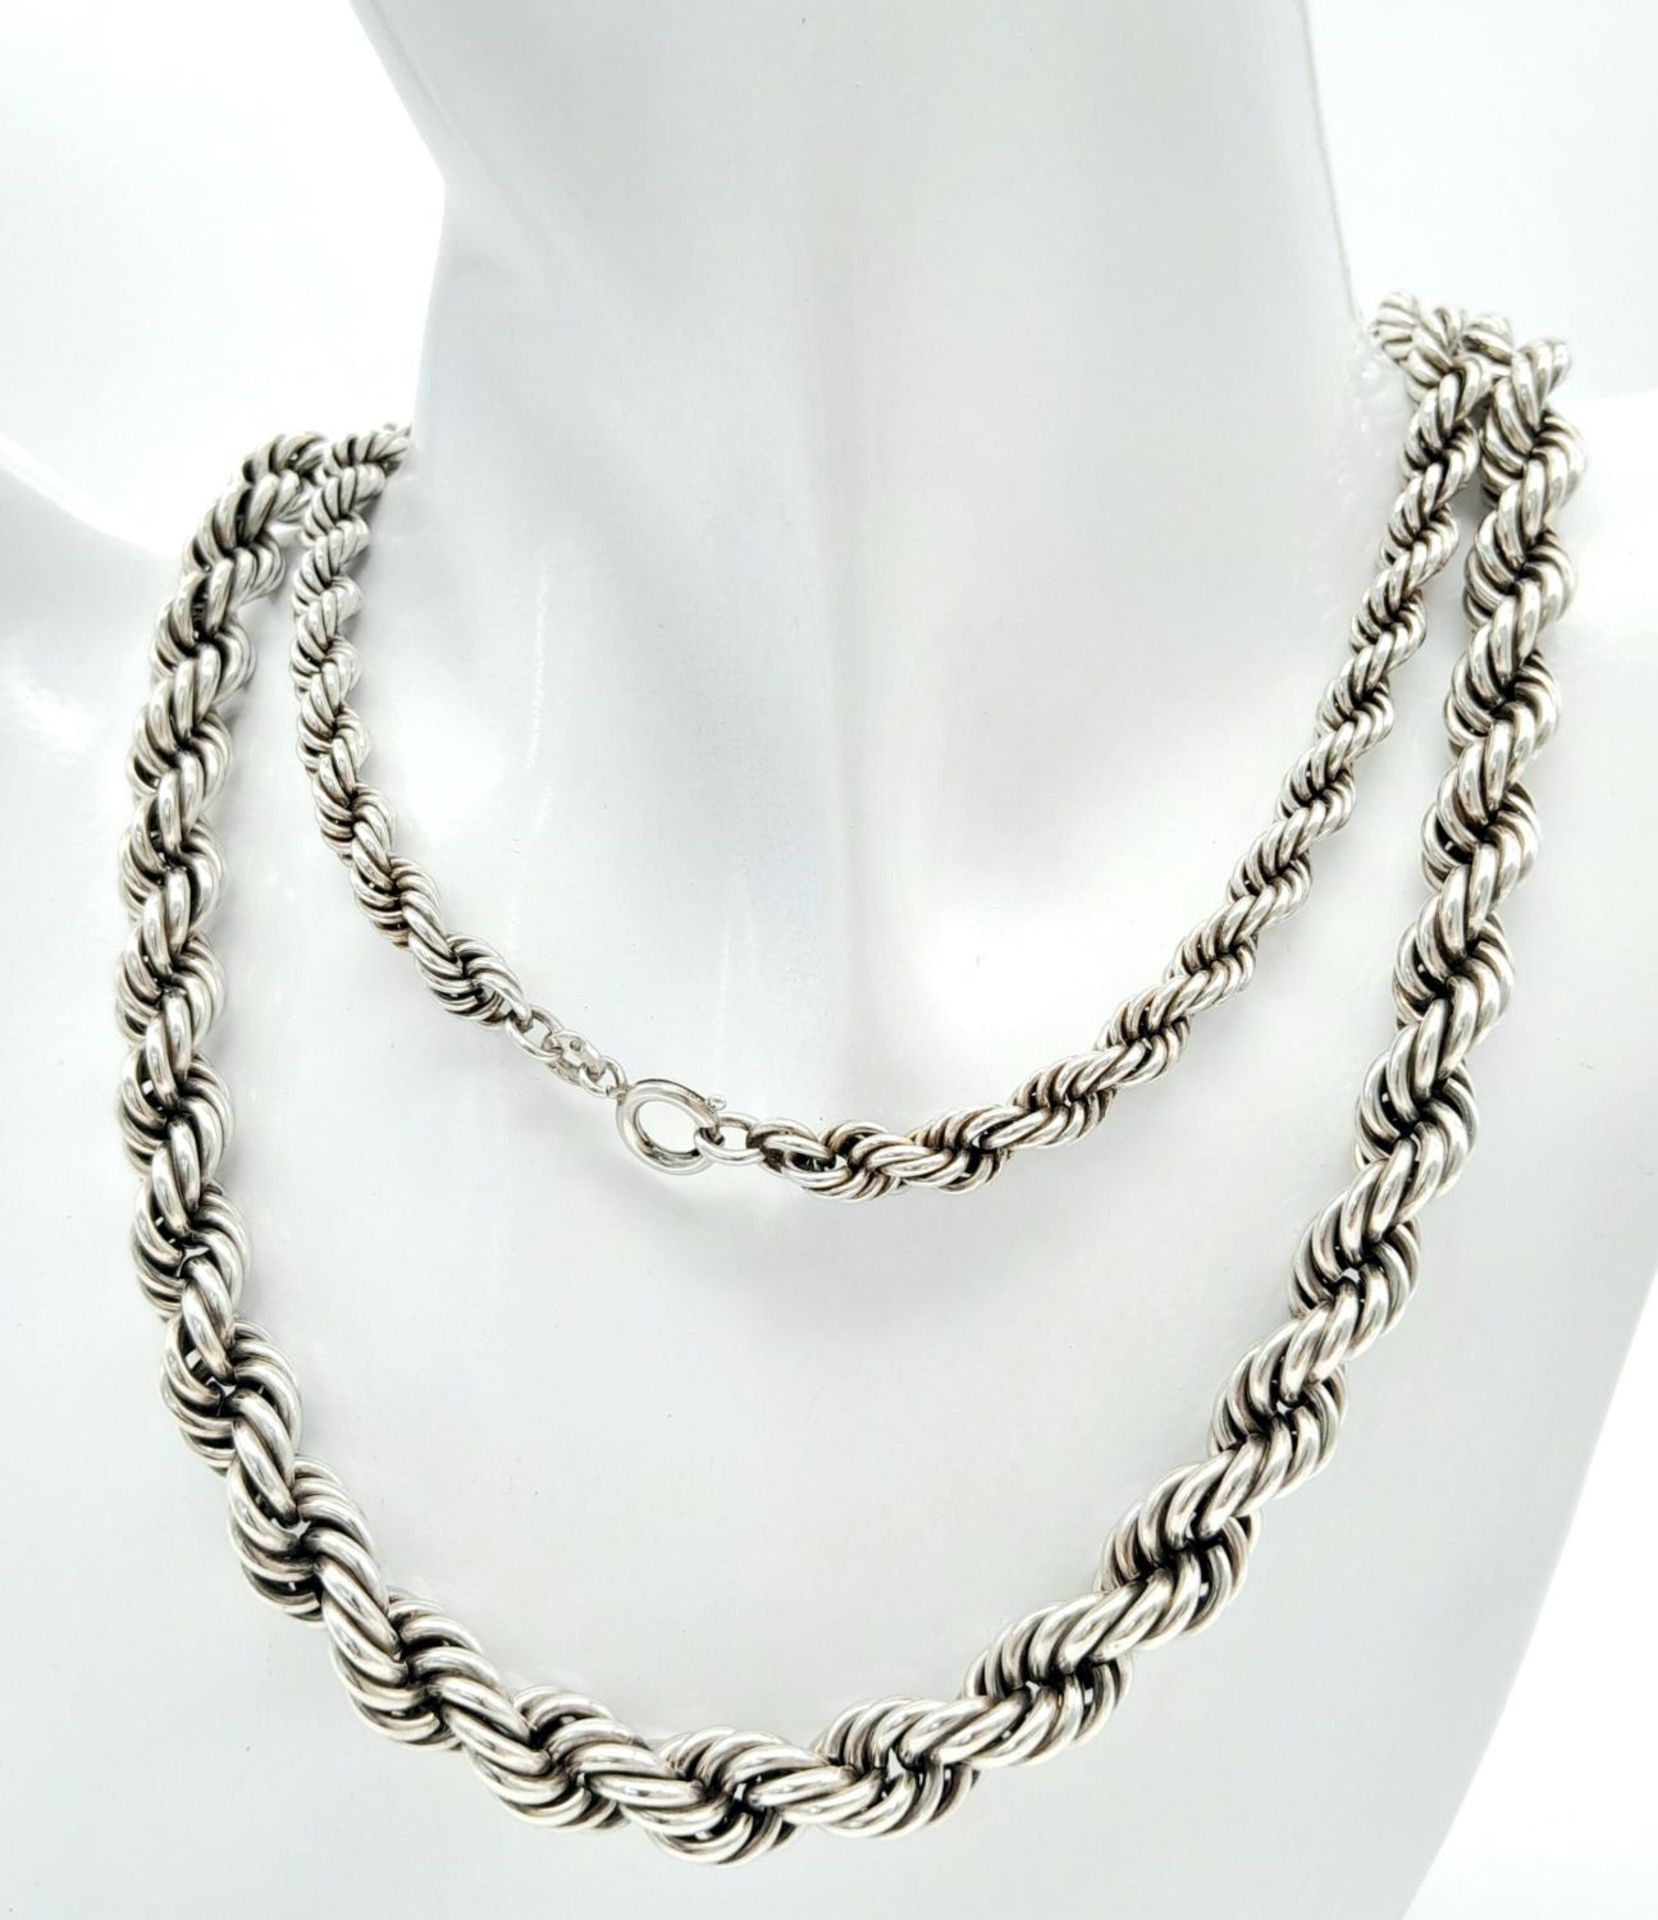 A 925 Silver Graduated Rope Chain Necklace. 89cm length, 80.48g weight. - Image 2 of 6